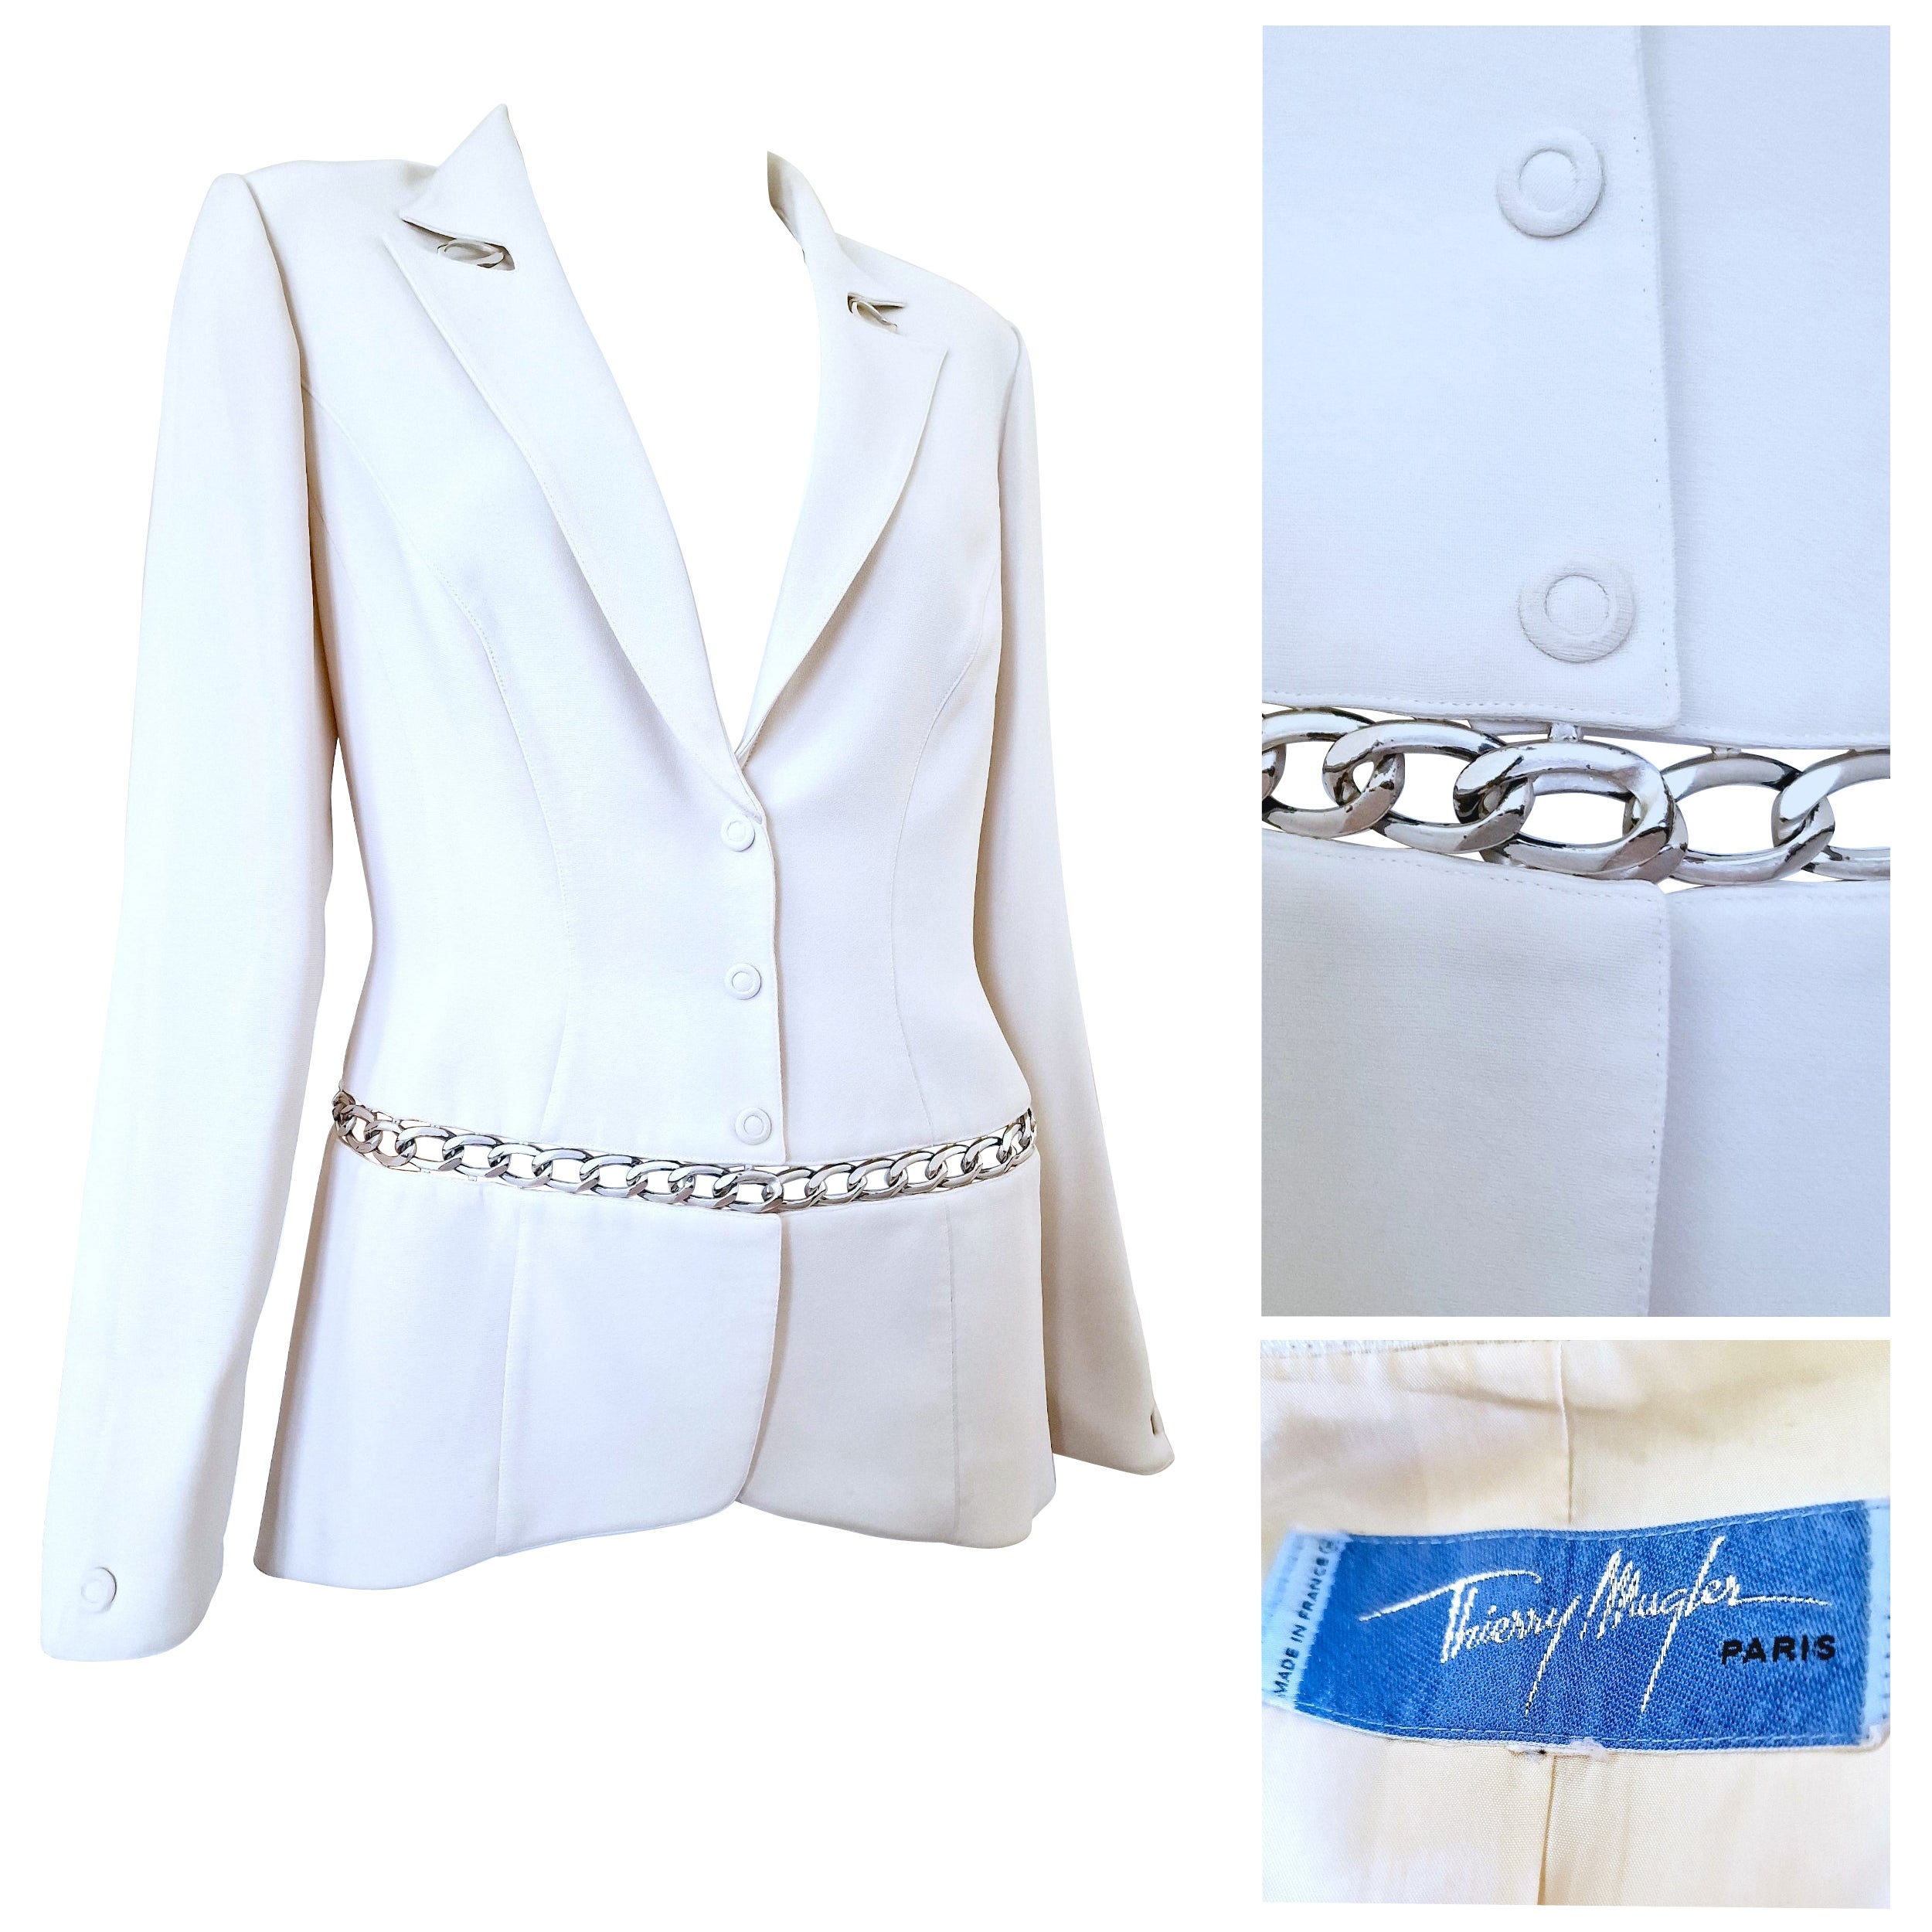 Thierry Mugler Chain Runway Evening Couture White Wasp Waist Large Blazer Jacket For Sale